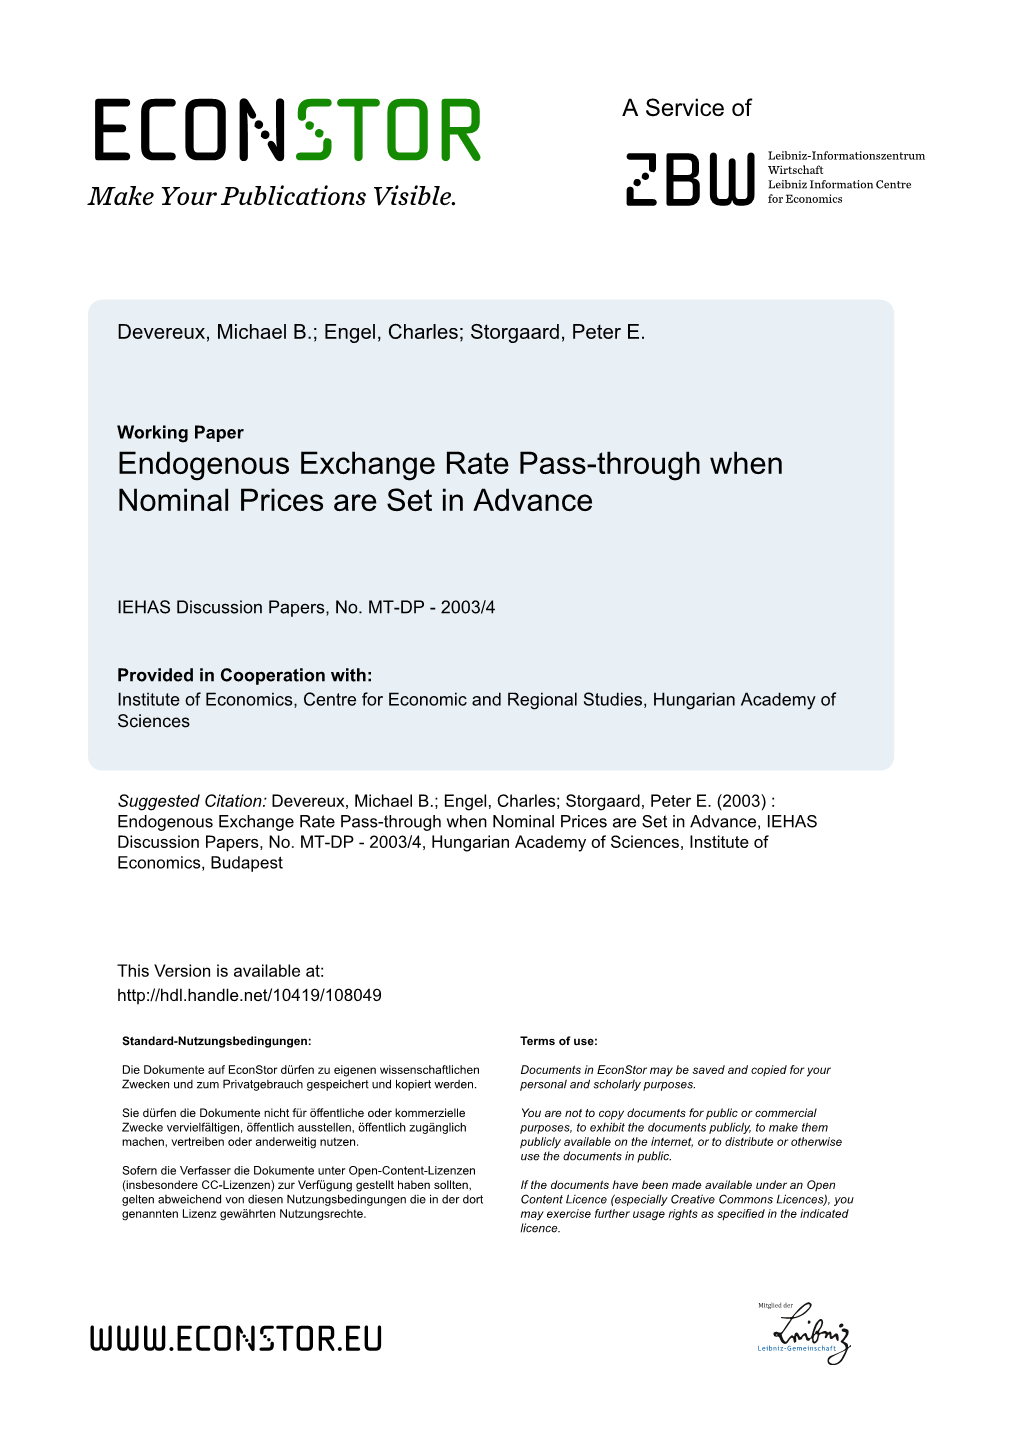 Endogenous Exchange Rate Pass-Through When Nominal Prices Are Set in Advance